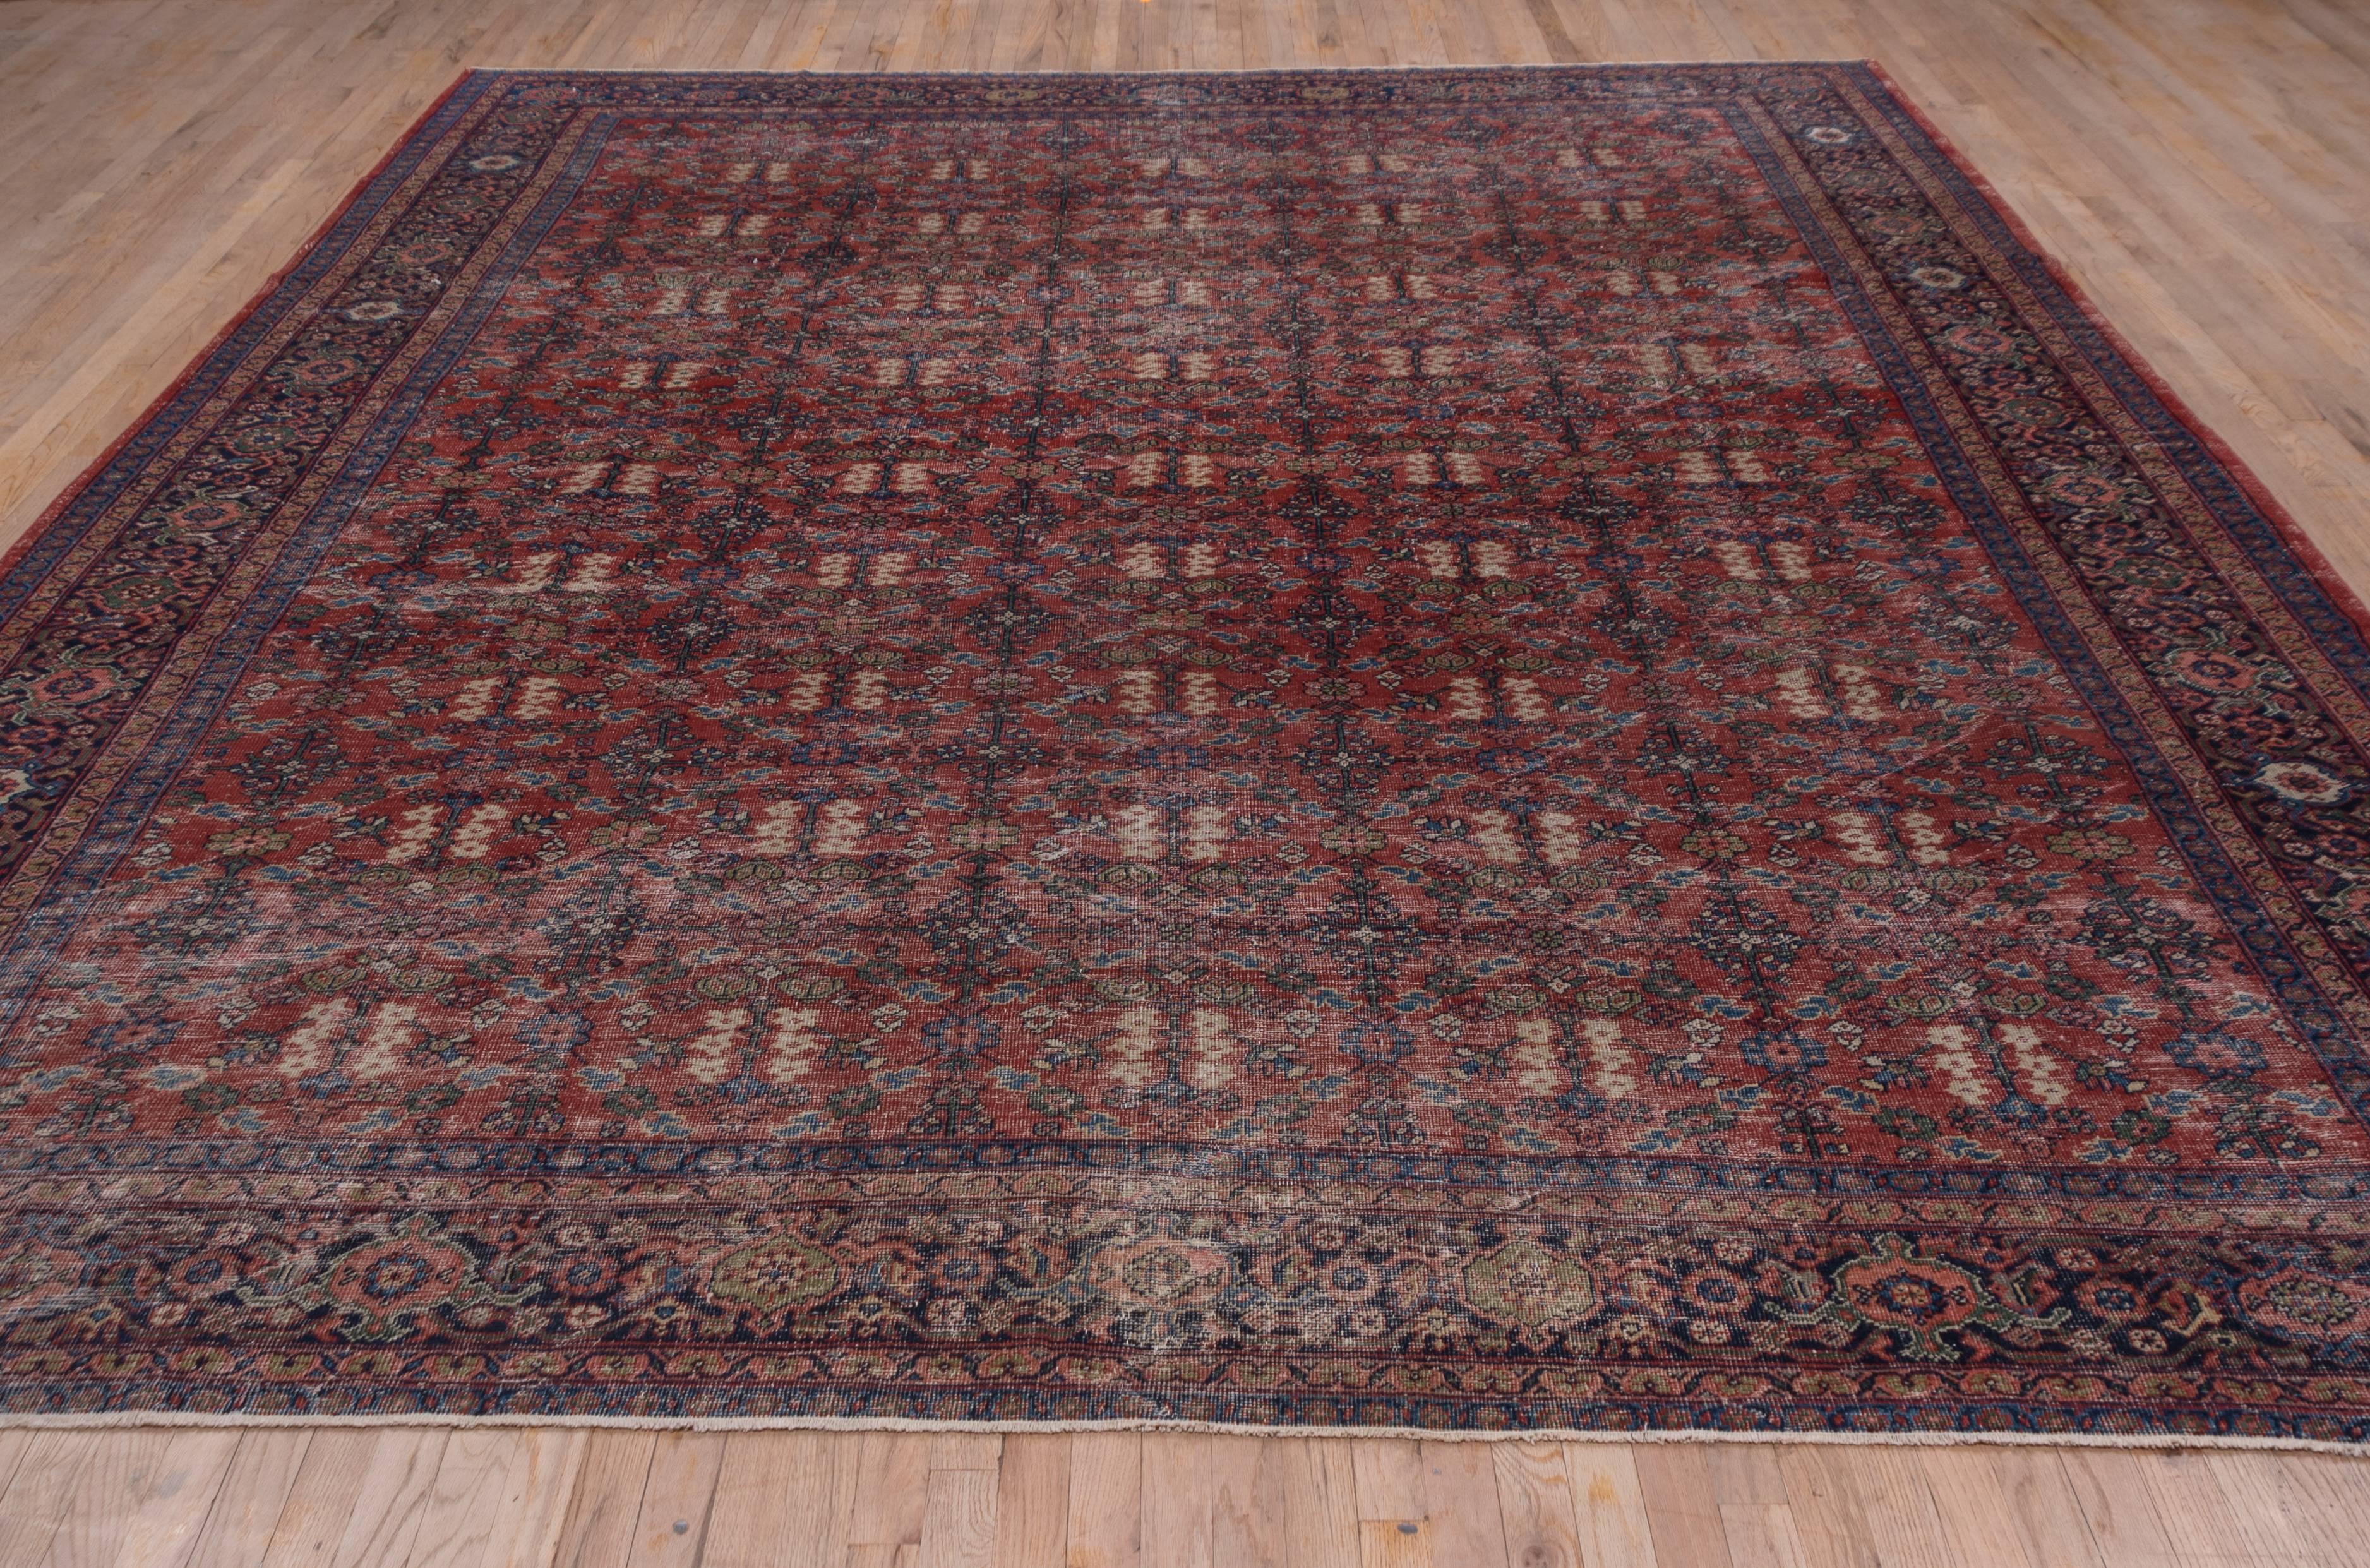 This rather worn but still stylistically integrous displays a small floral wreath and six  posy ivory  flowers on a madder red ground. This antique west Persian carpet is in shabby chic condition.